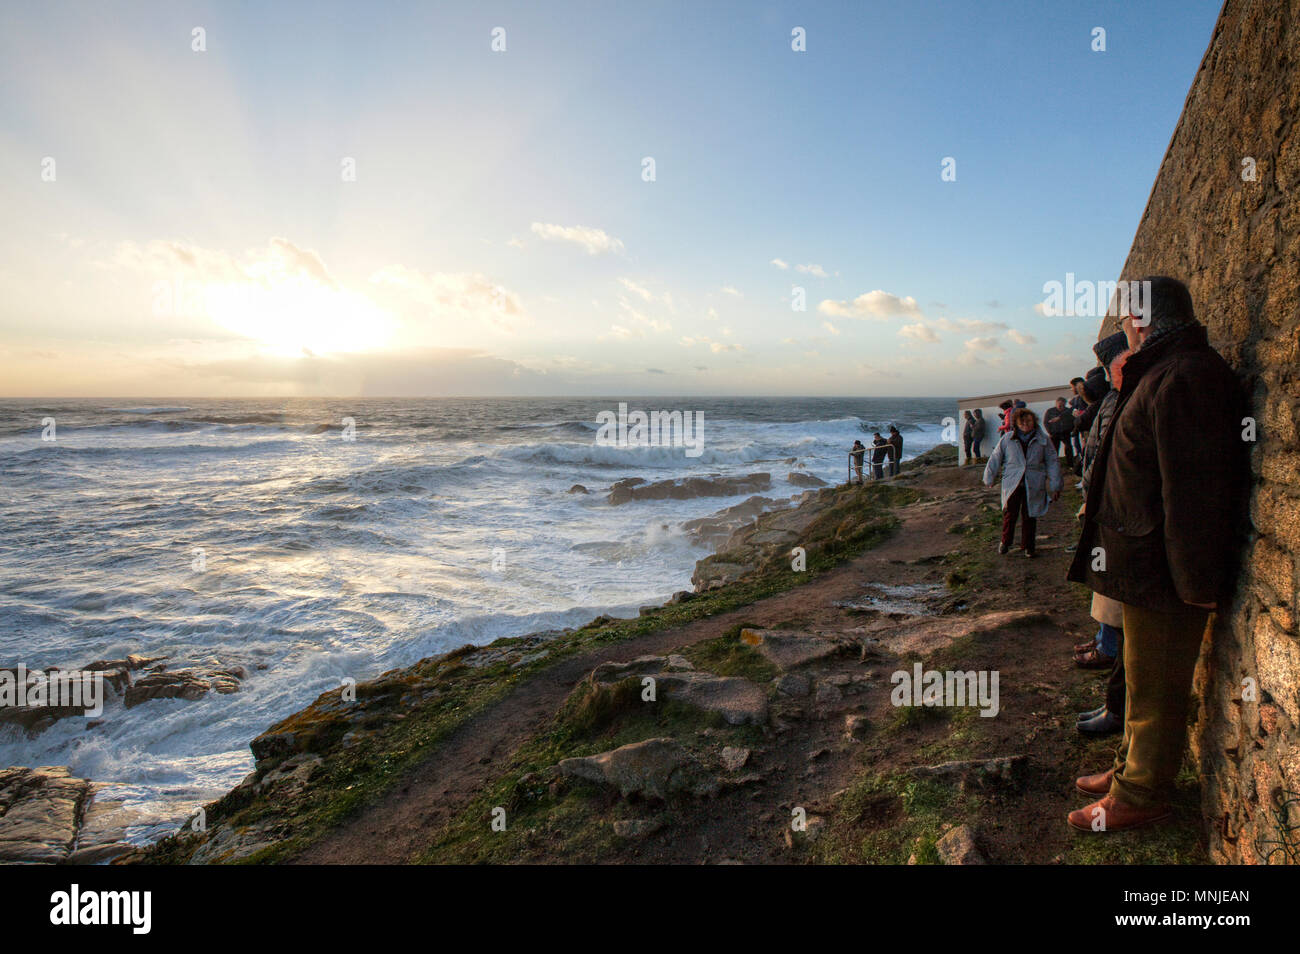 Group of people standing along coastal wall and admiring scenic view of sunset at sea, Ploemeur, Morbihan, France Stock Photo